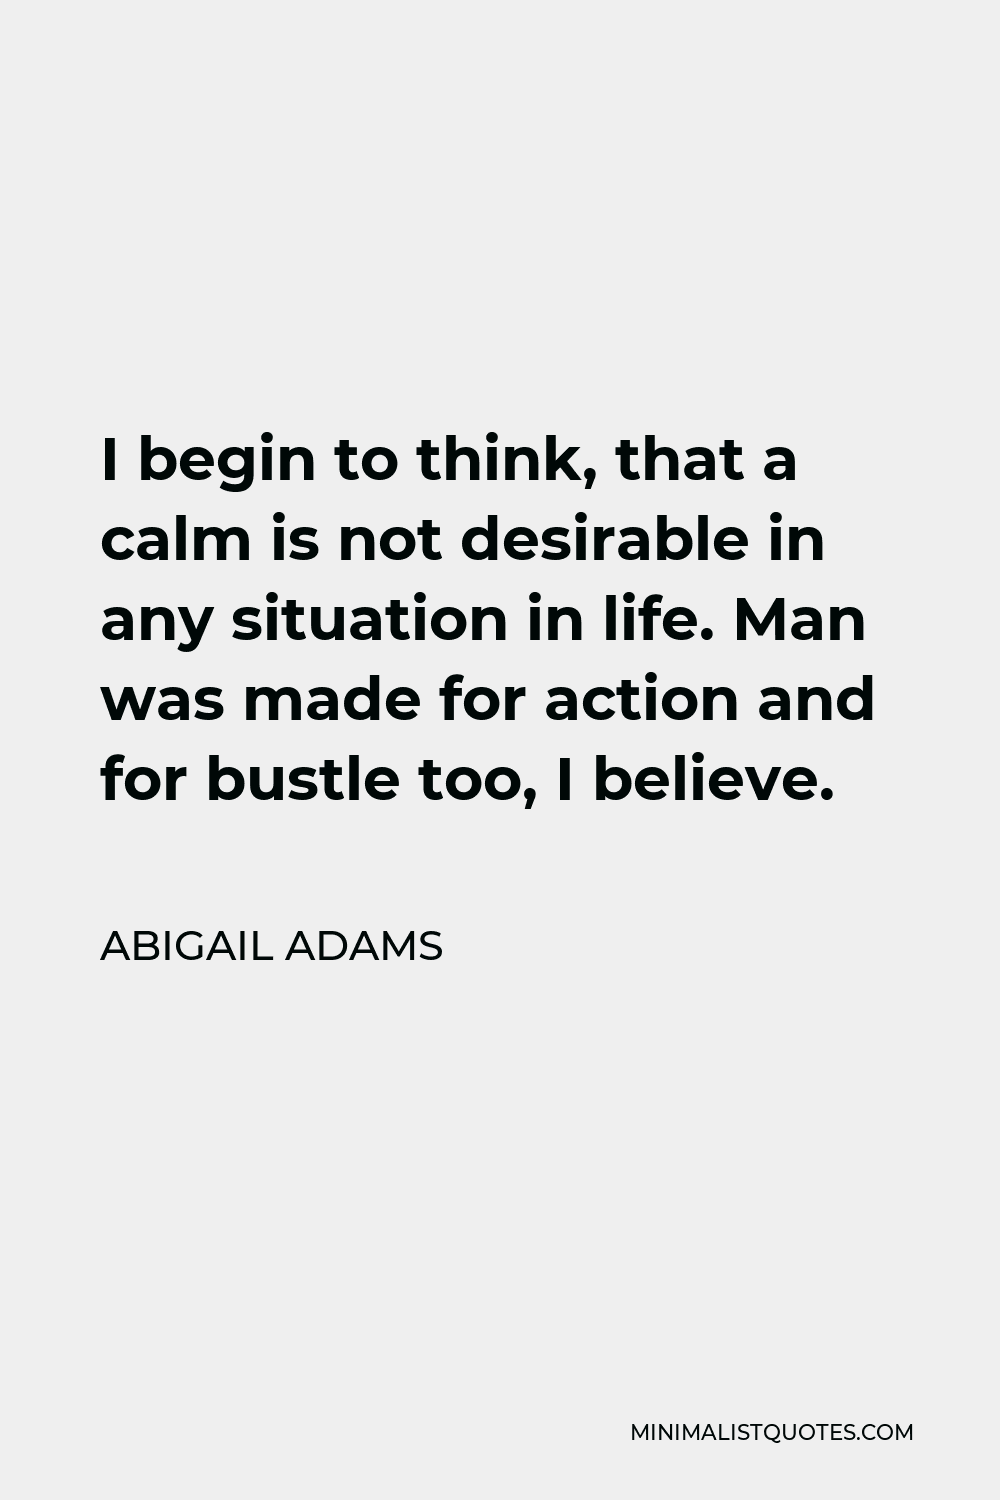 Abigail Adams Quote - I begin to think, that a calm is not desirable in any situation in life. Man was made for action and for bustle too, I believe.